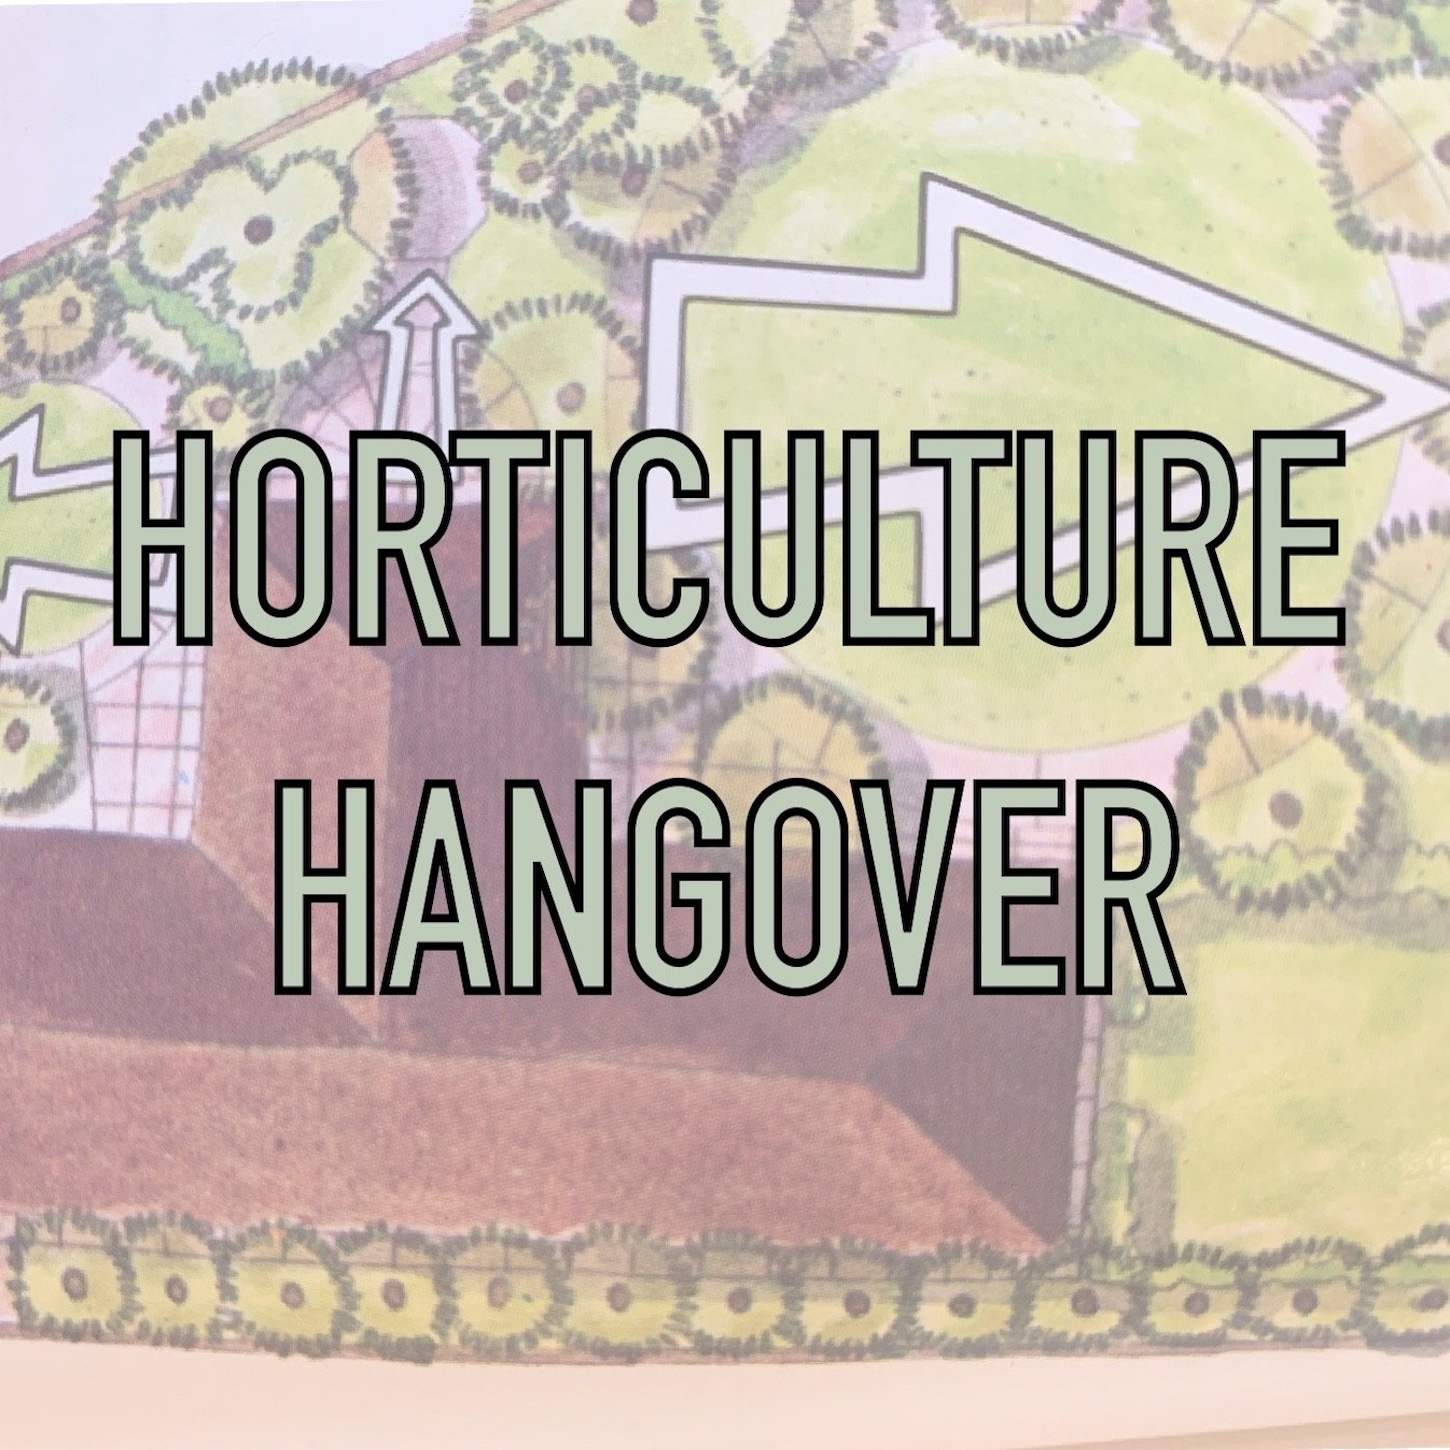 Horticulture Hangover Radio Show thumbnail